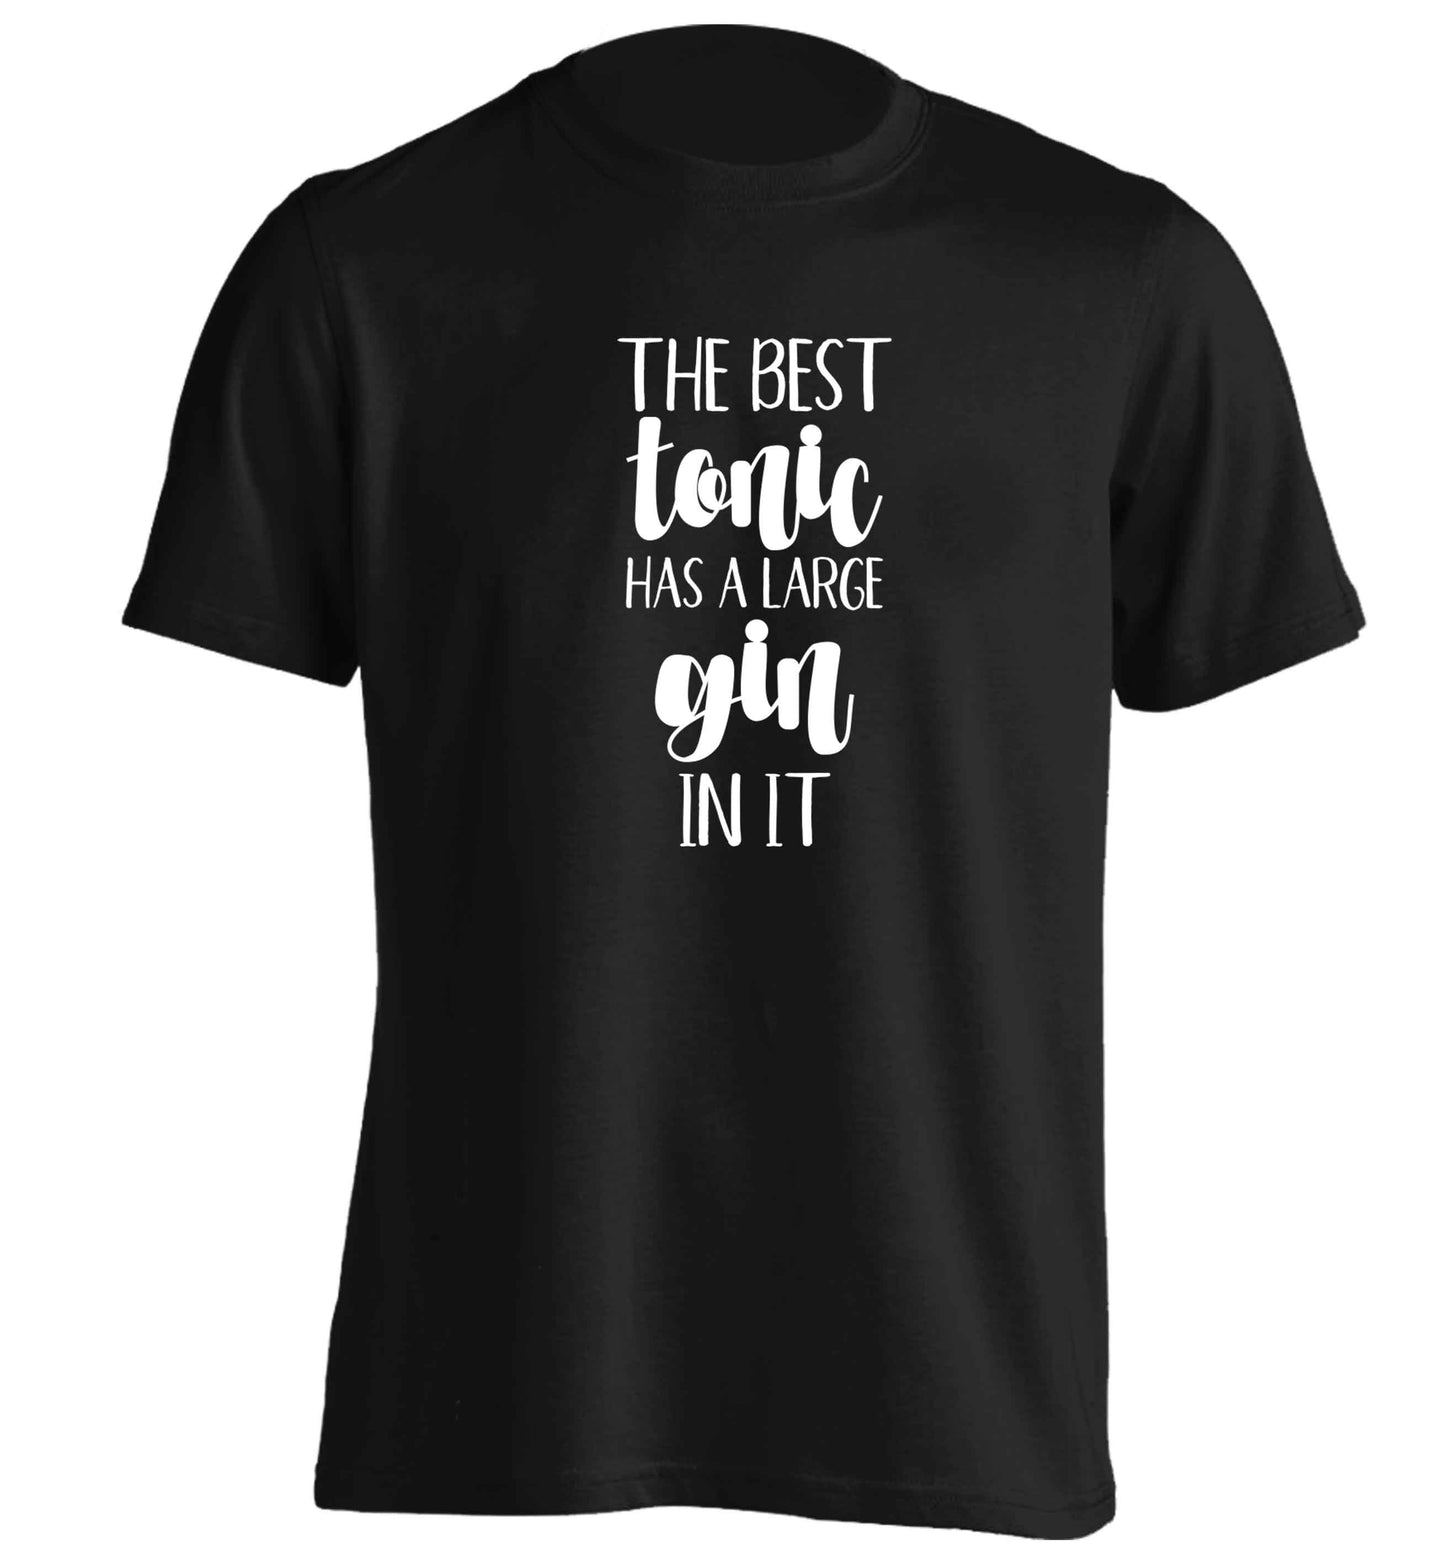 The best tonic has a large gin in it adults unisex black Tshirt 2XL